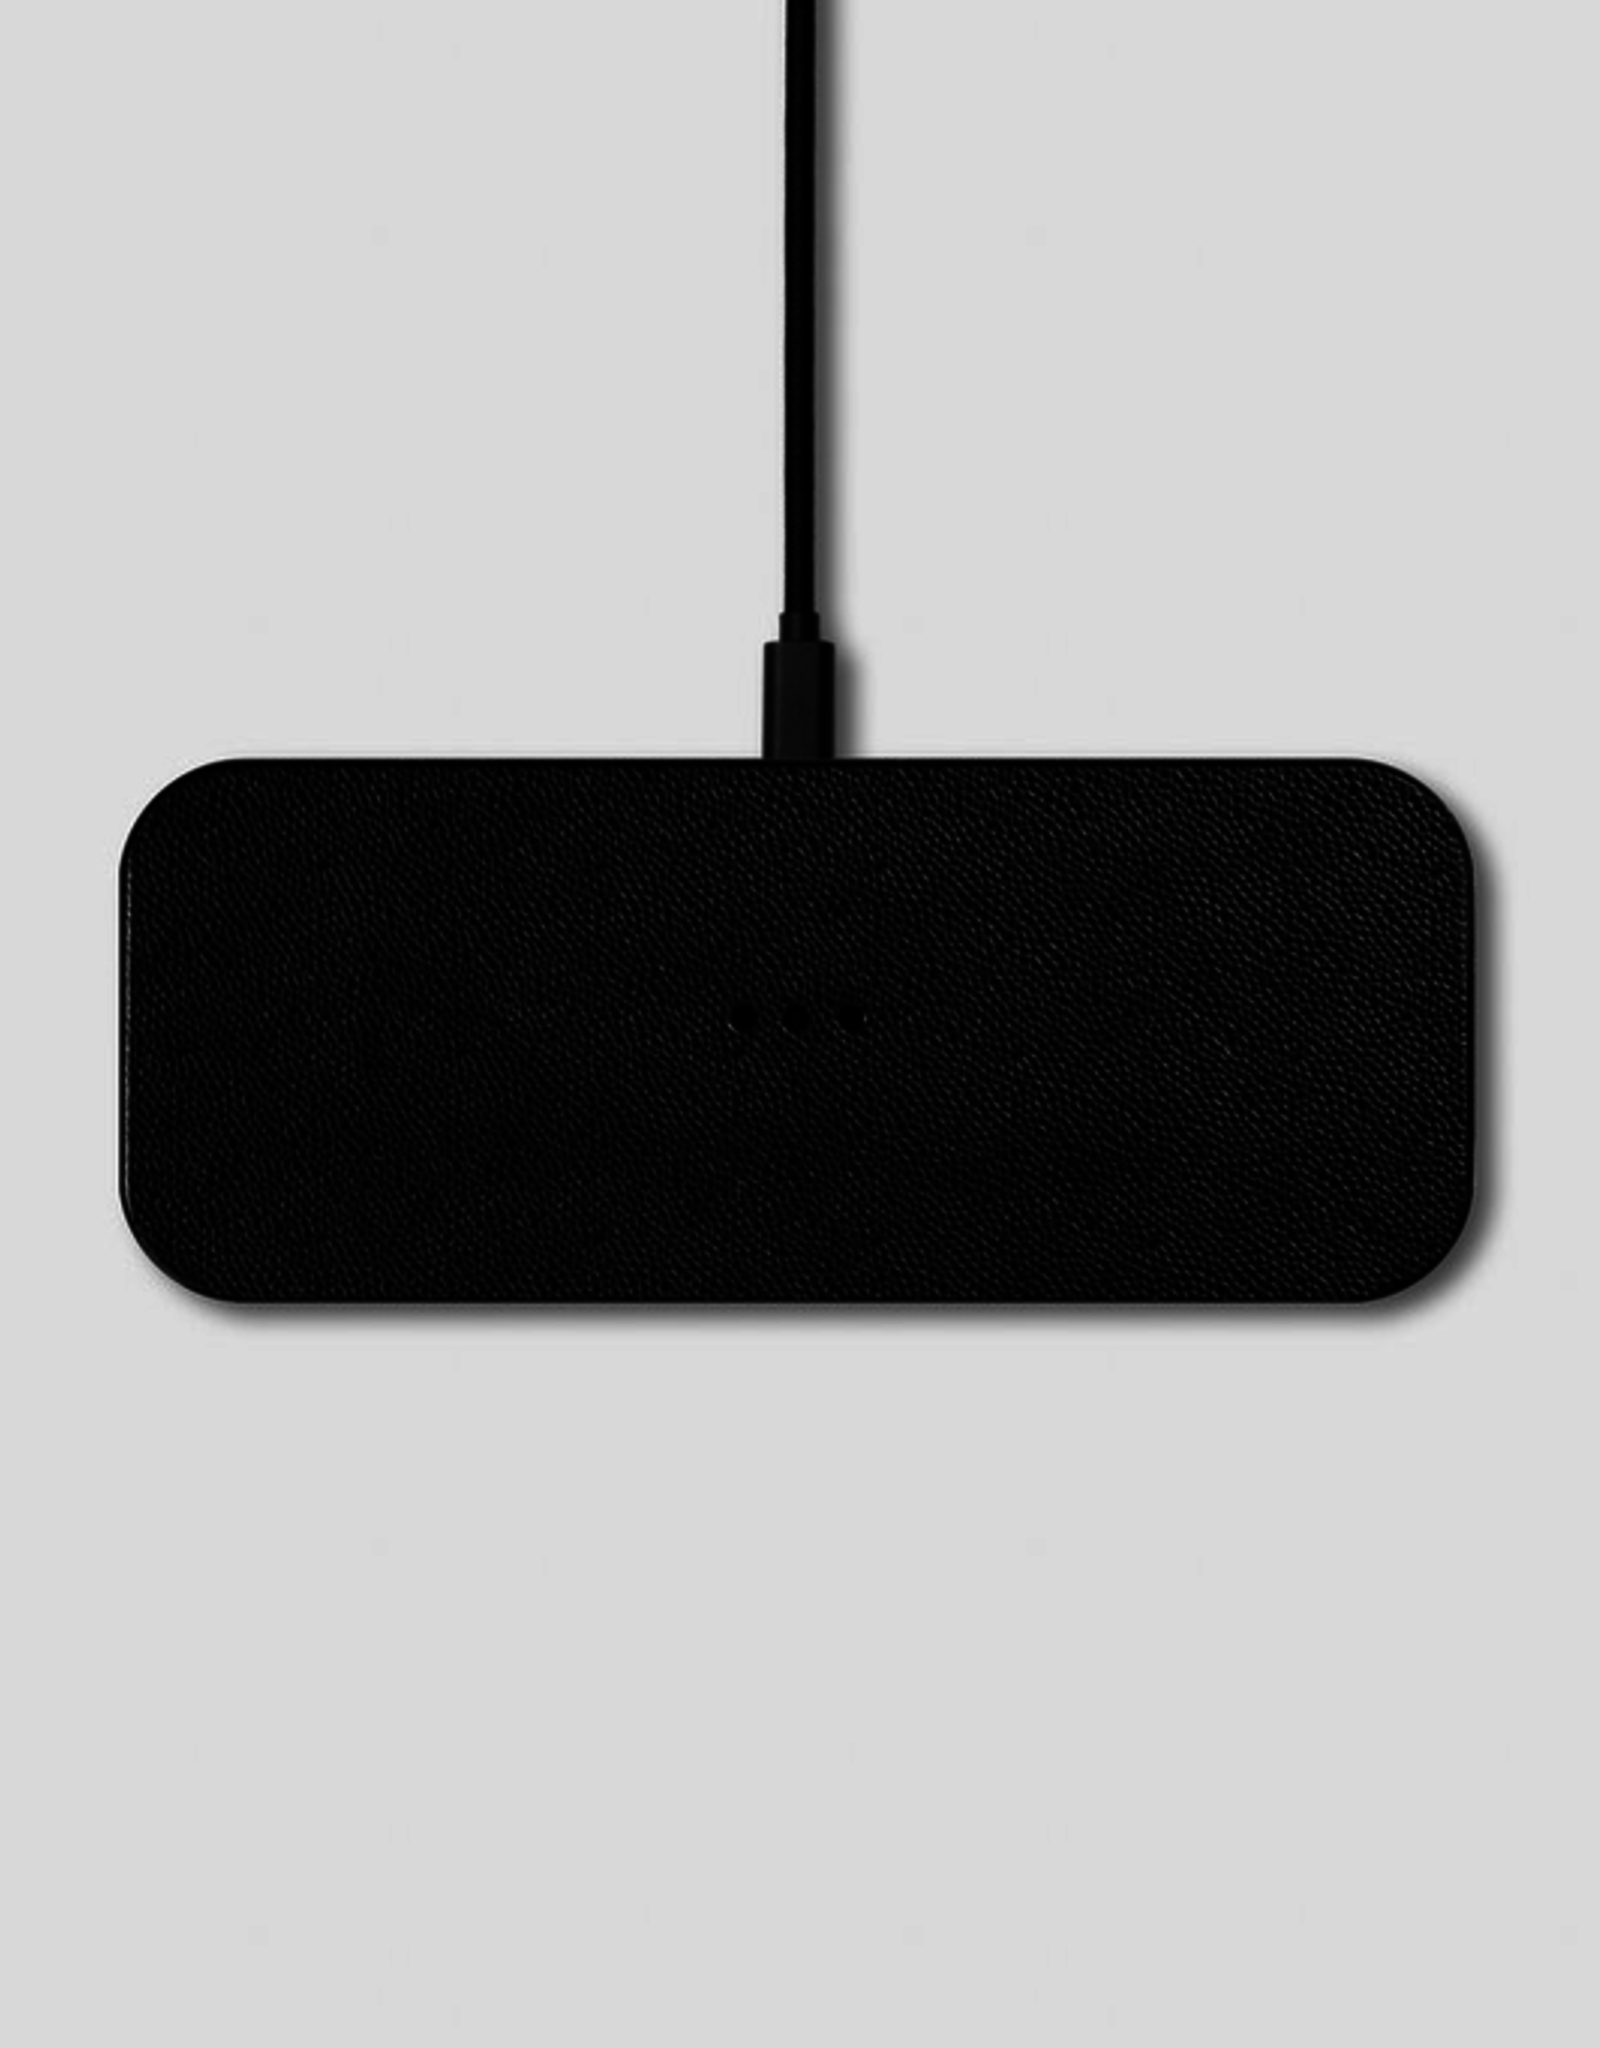 Black Catch:2 Wireless Charger